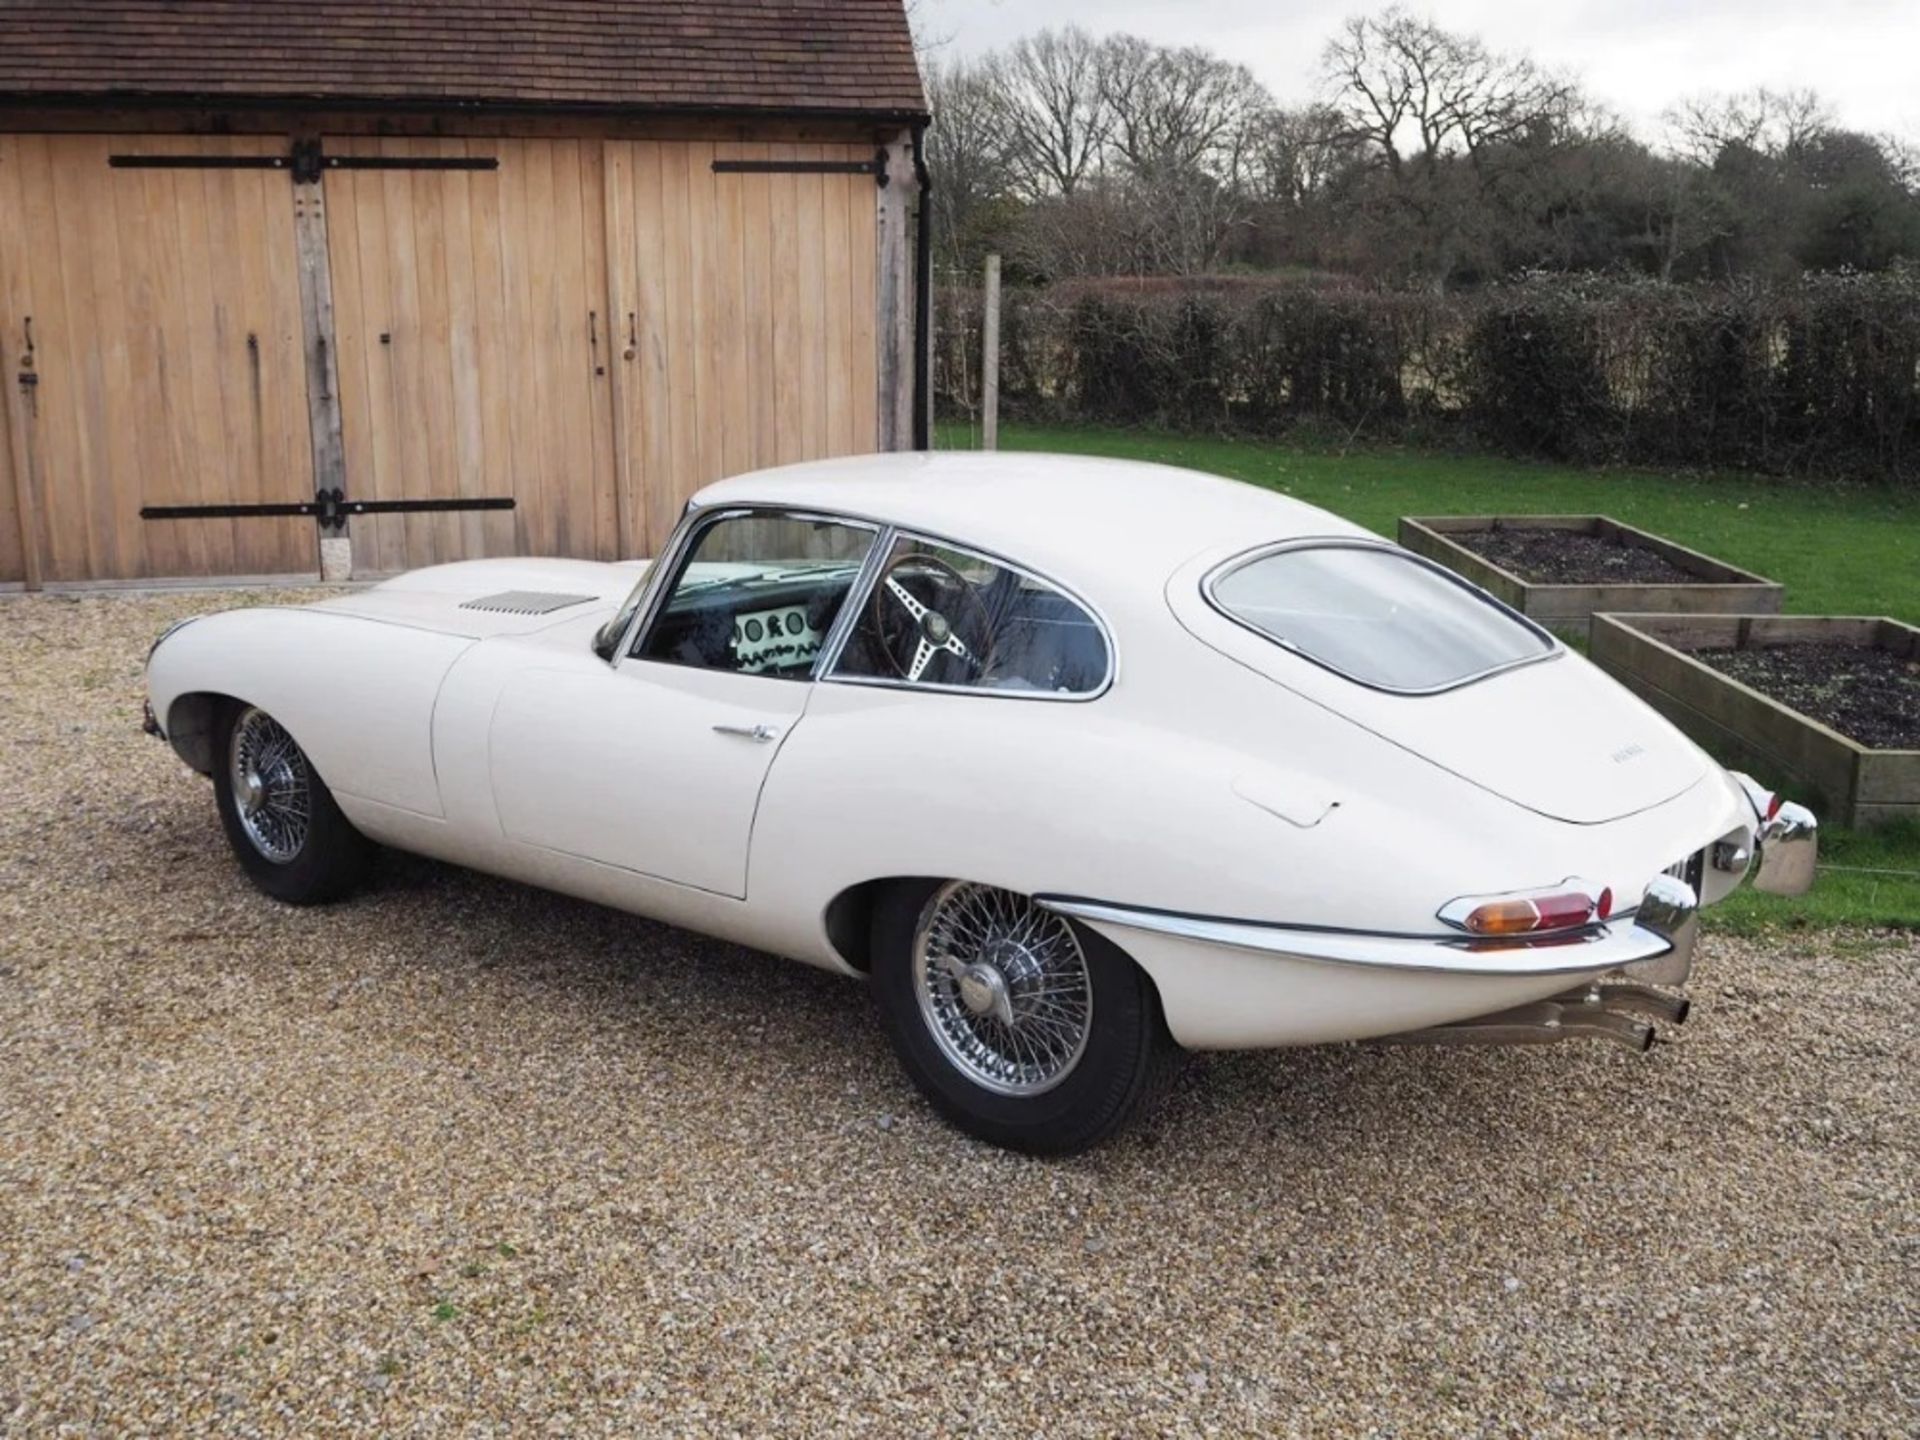 1962 JAGUAR E-TYPE SERIES I FIXED HEAD COUPE Registration Number: 696 VC Chassis Number: 860911 - Image 3 of 12